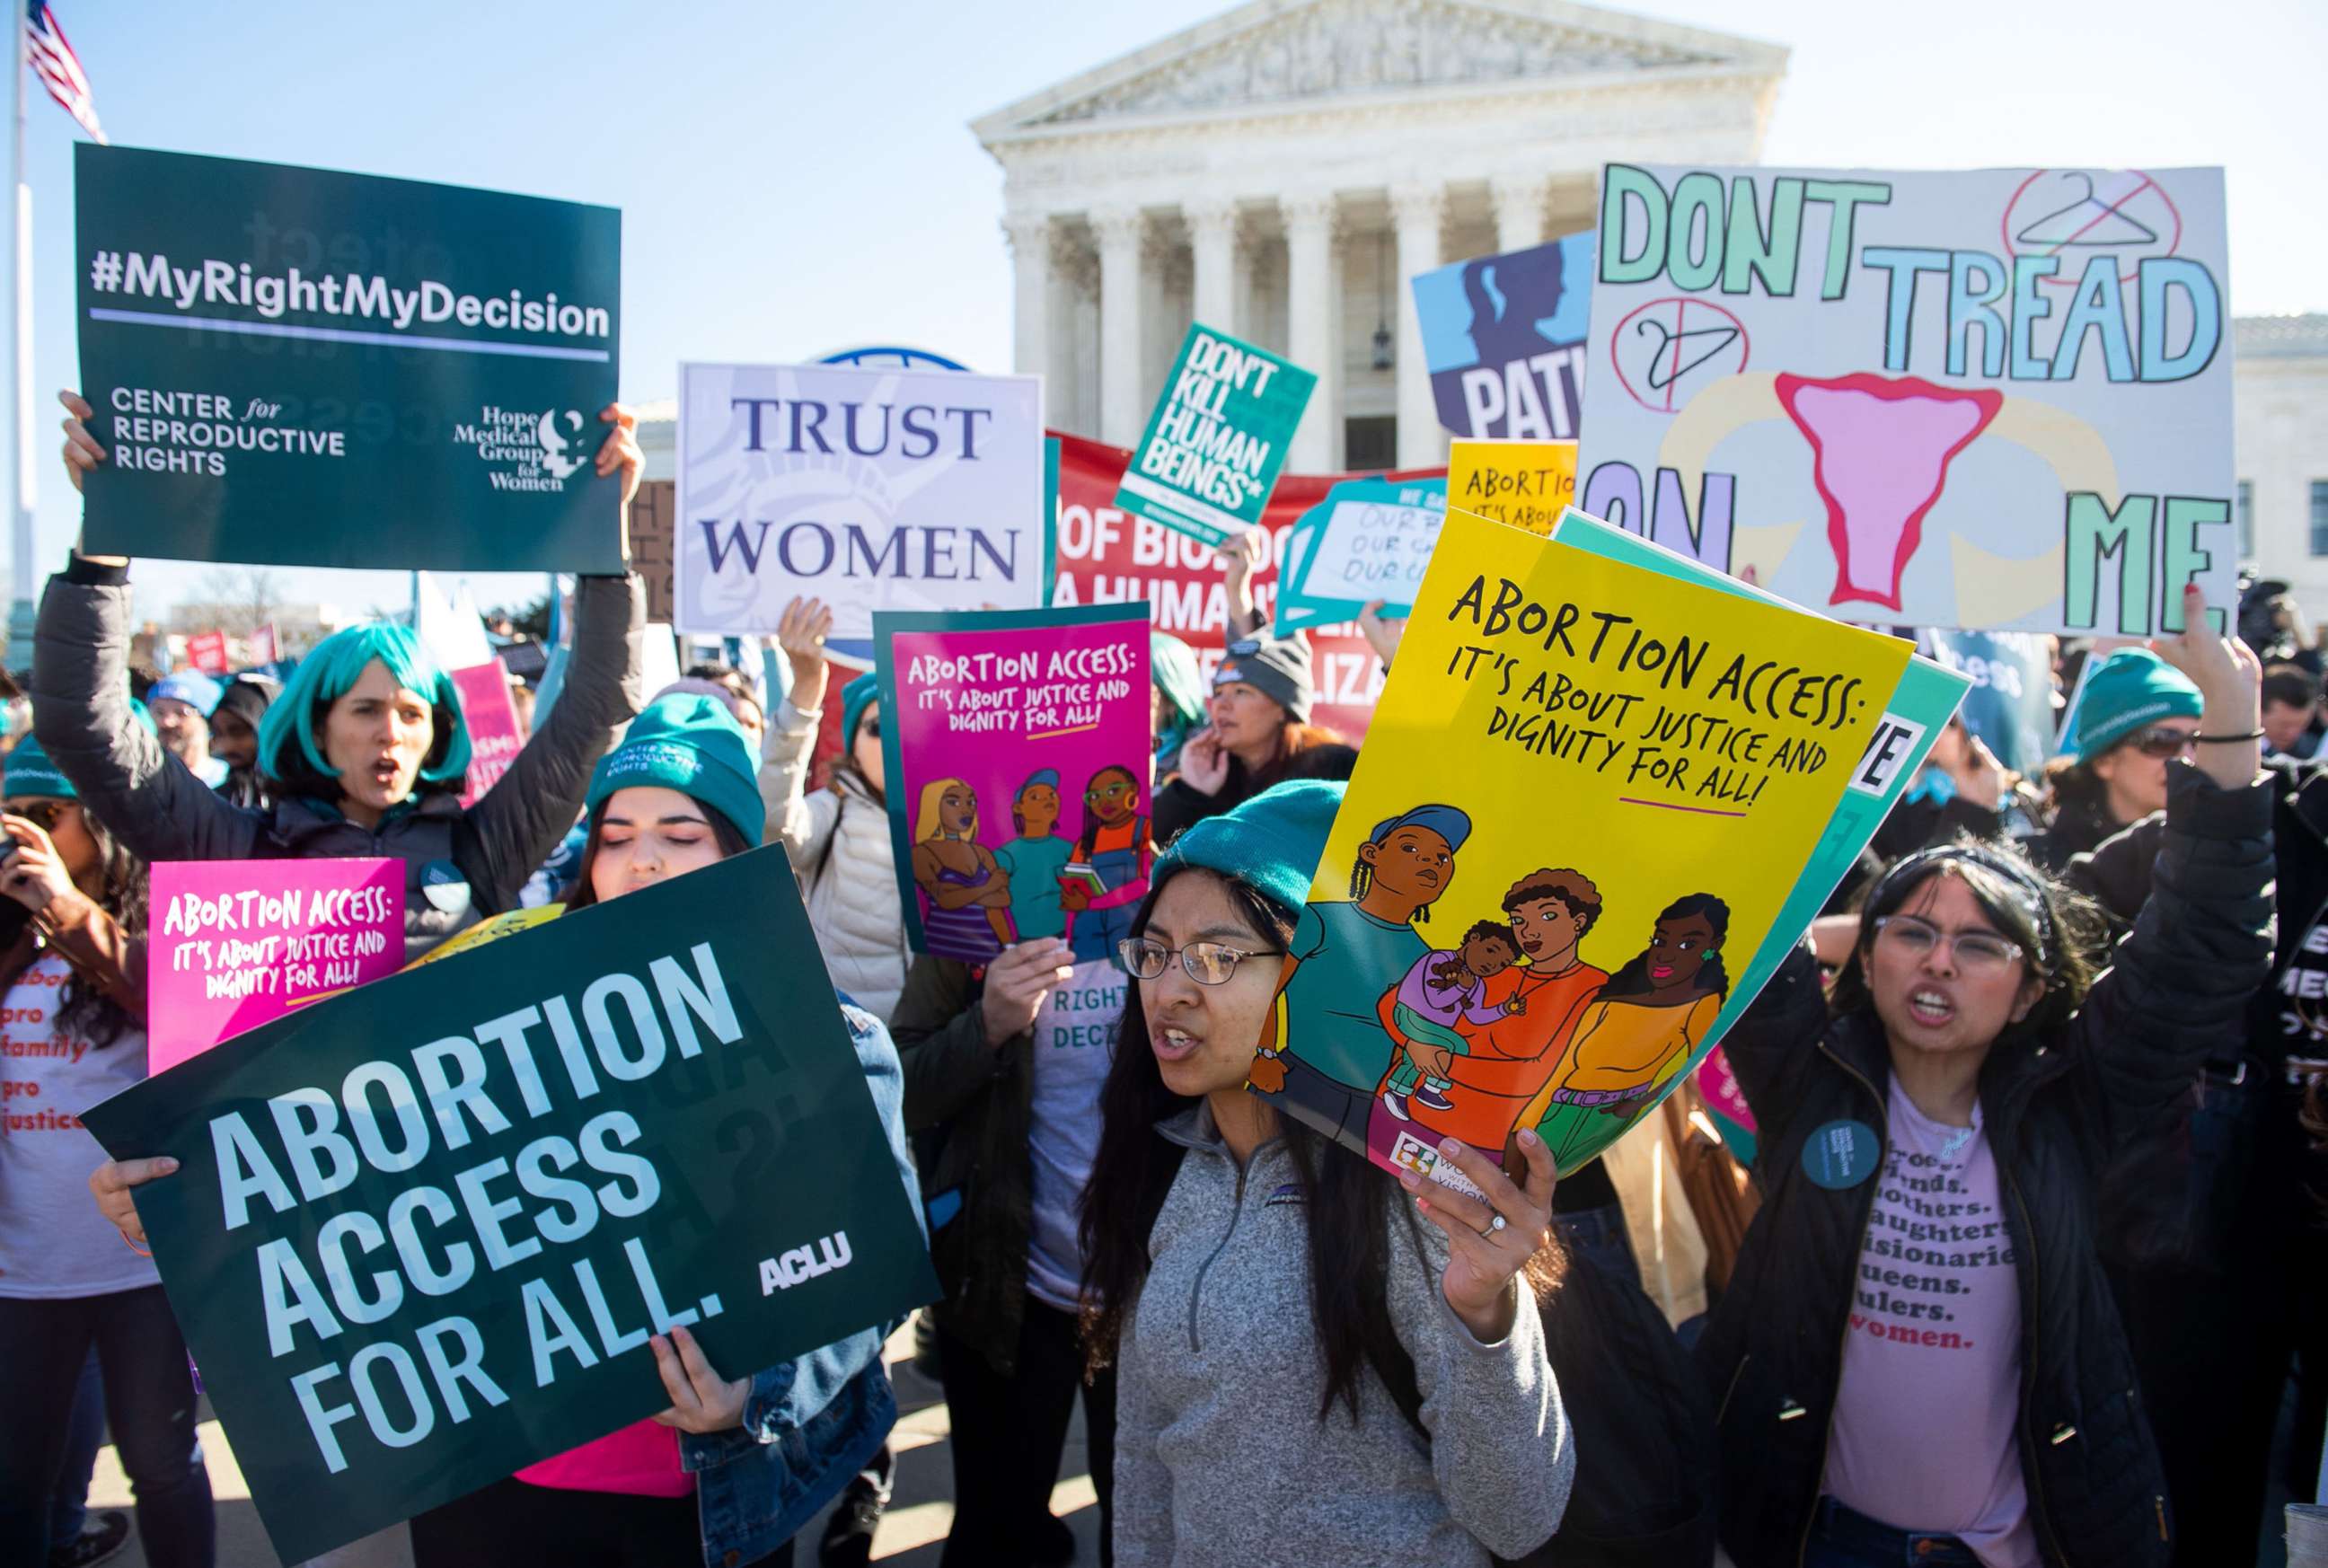 PHOTO: Pro-choice activists supporting legal access to abortion protest during a demonstration outside the US Supreme Court in Washington, DC, March 4, 2020.